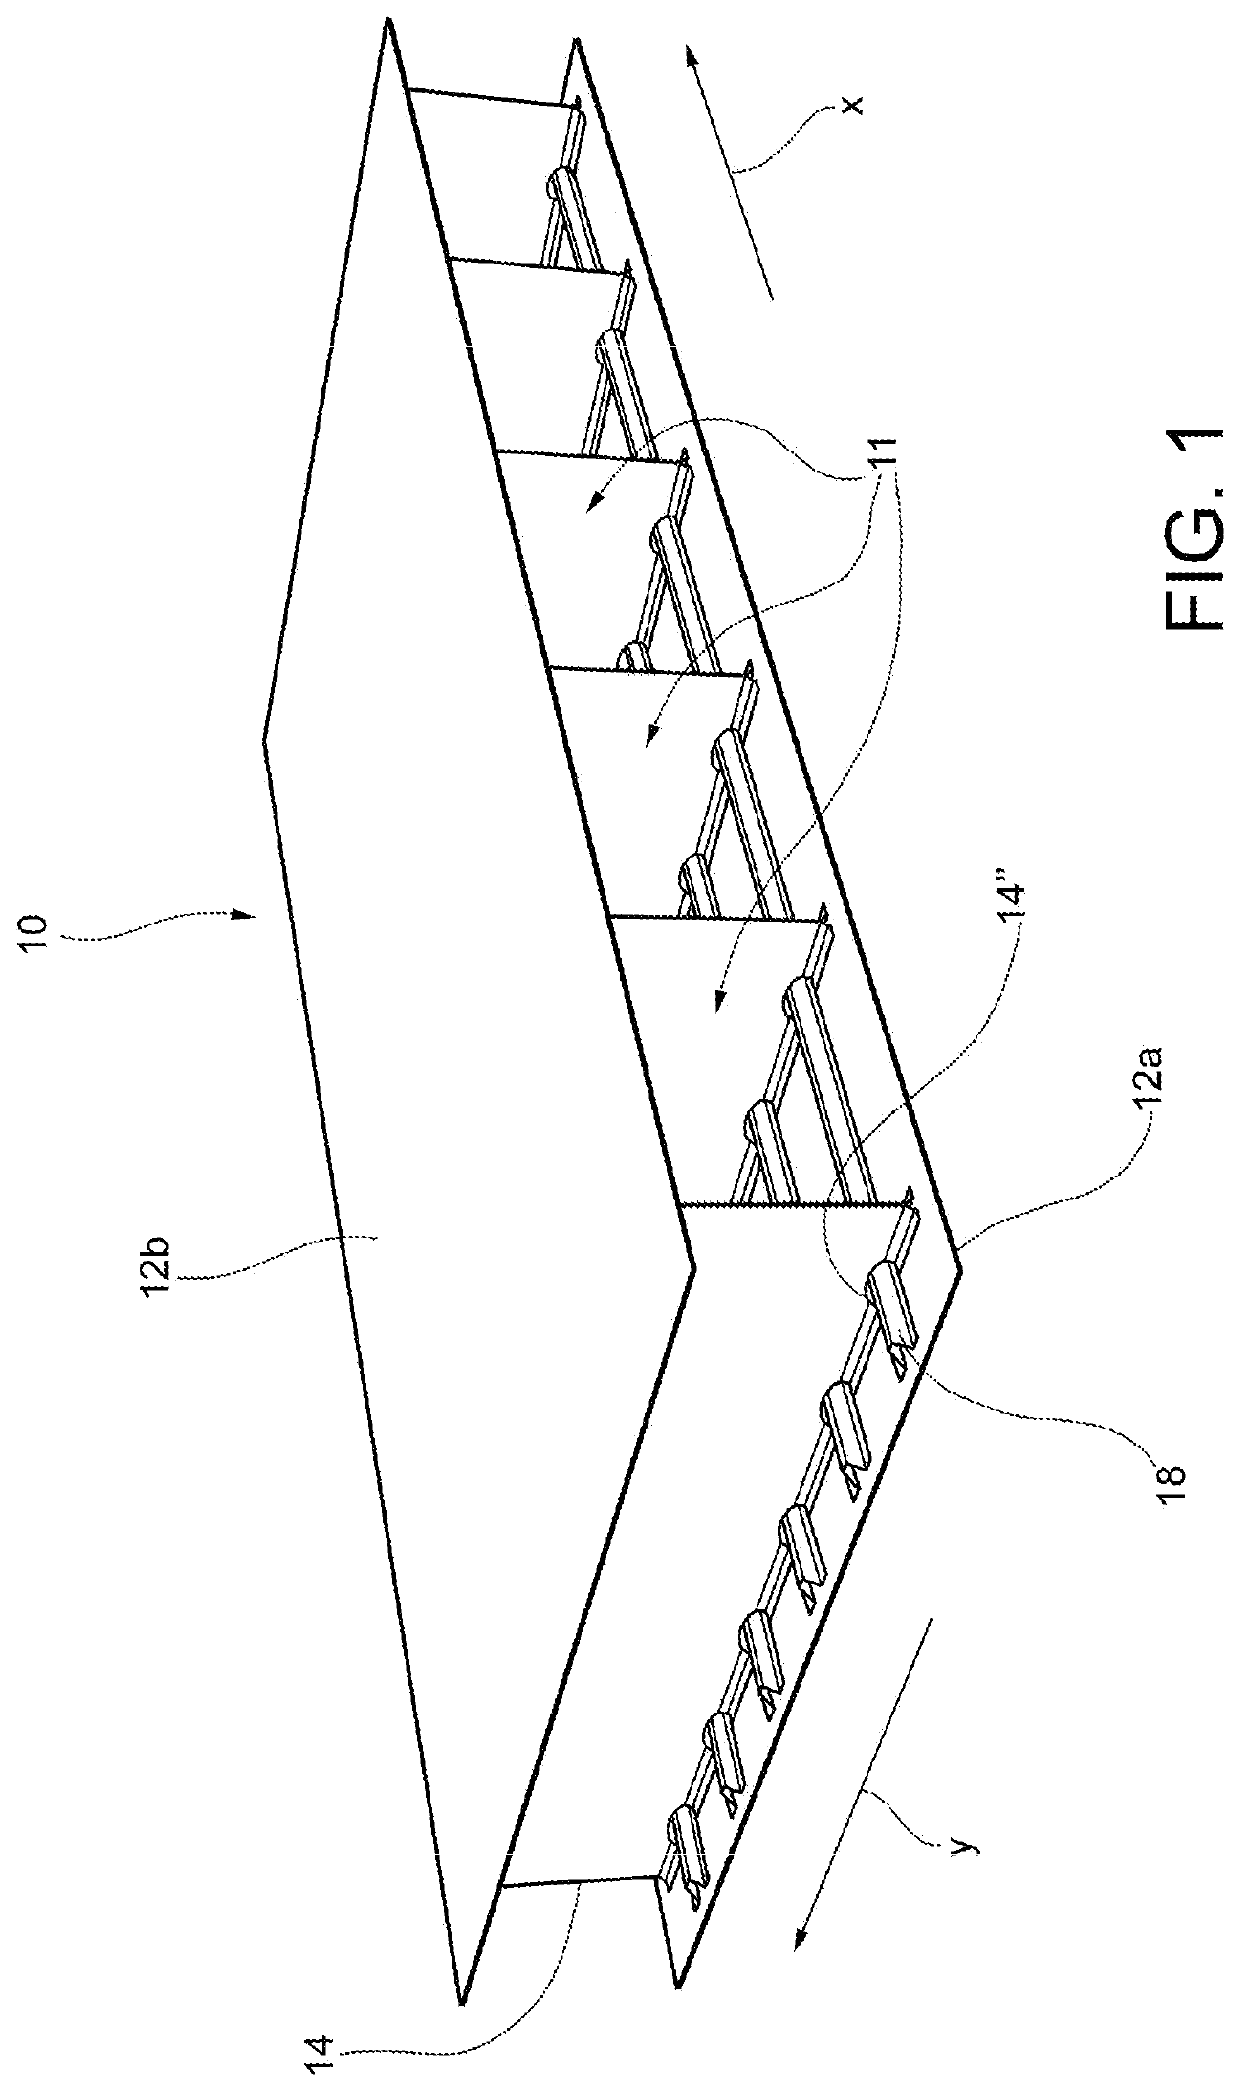 Method for manufacturing a multi-ribbed wing-box of composite material with integrated stiffened panels and communicating bays